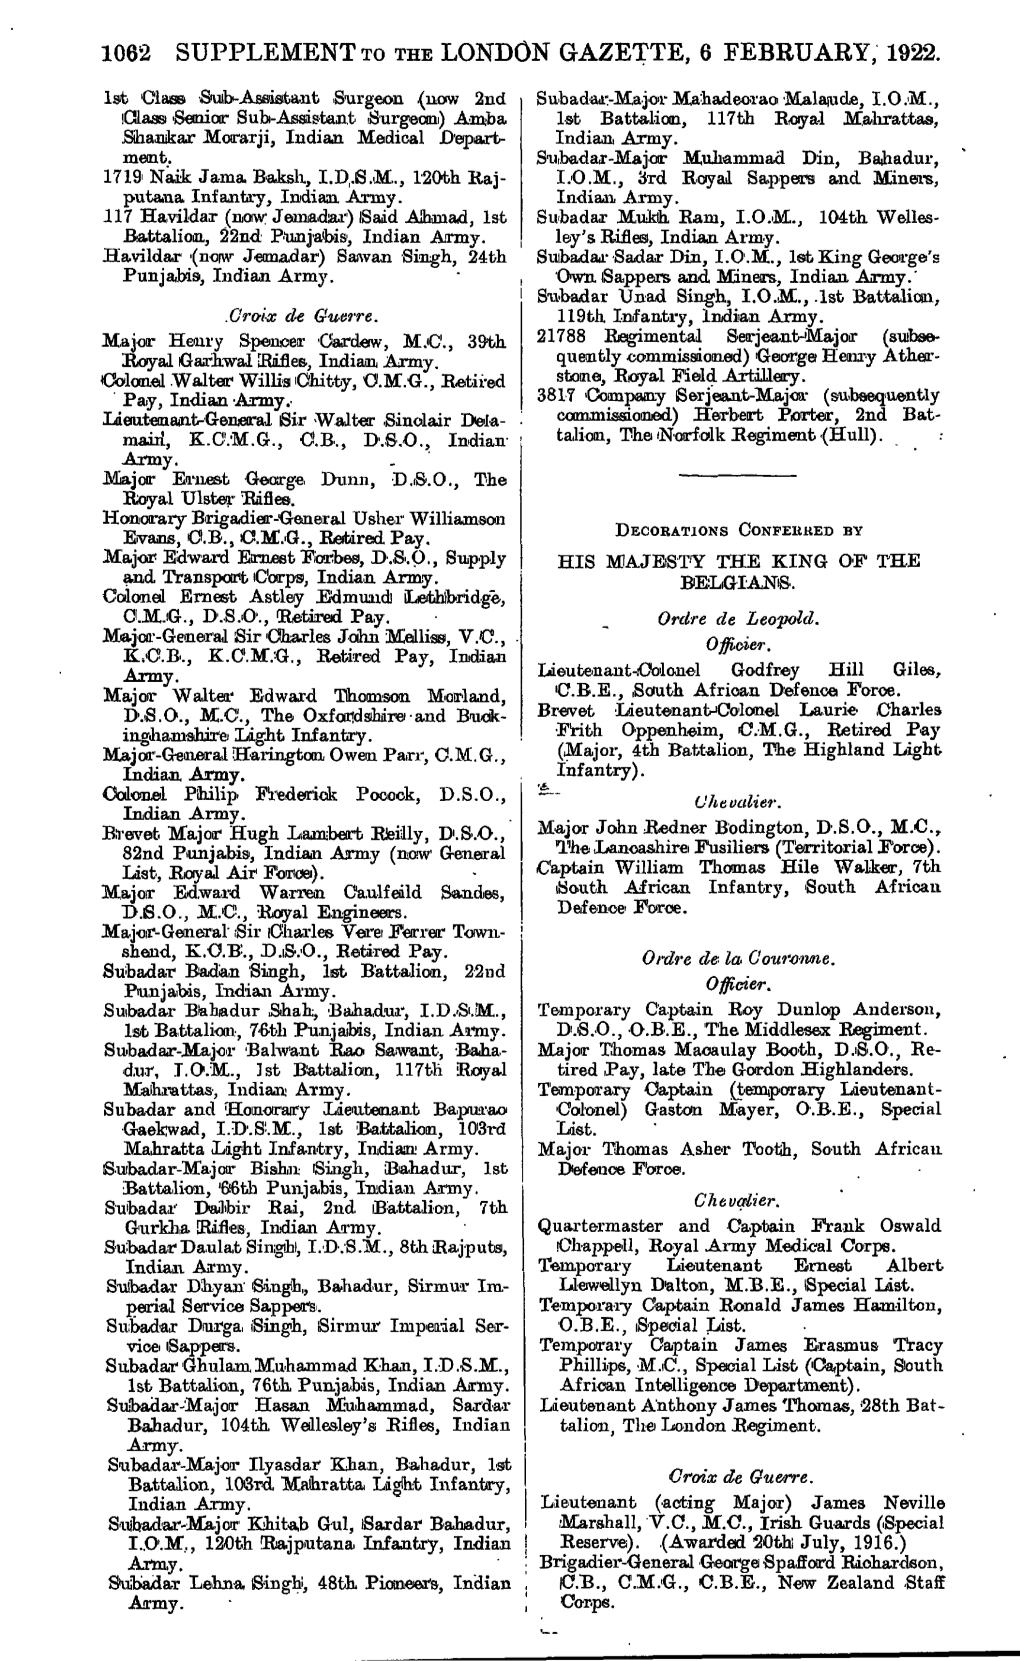 1062 Supplement to the London Gazette, 6 February, 1922